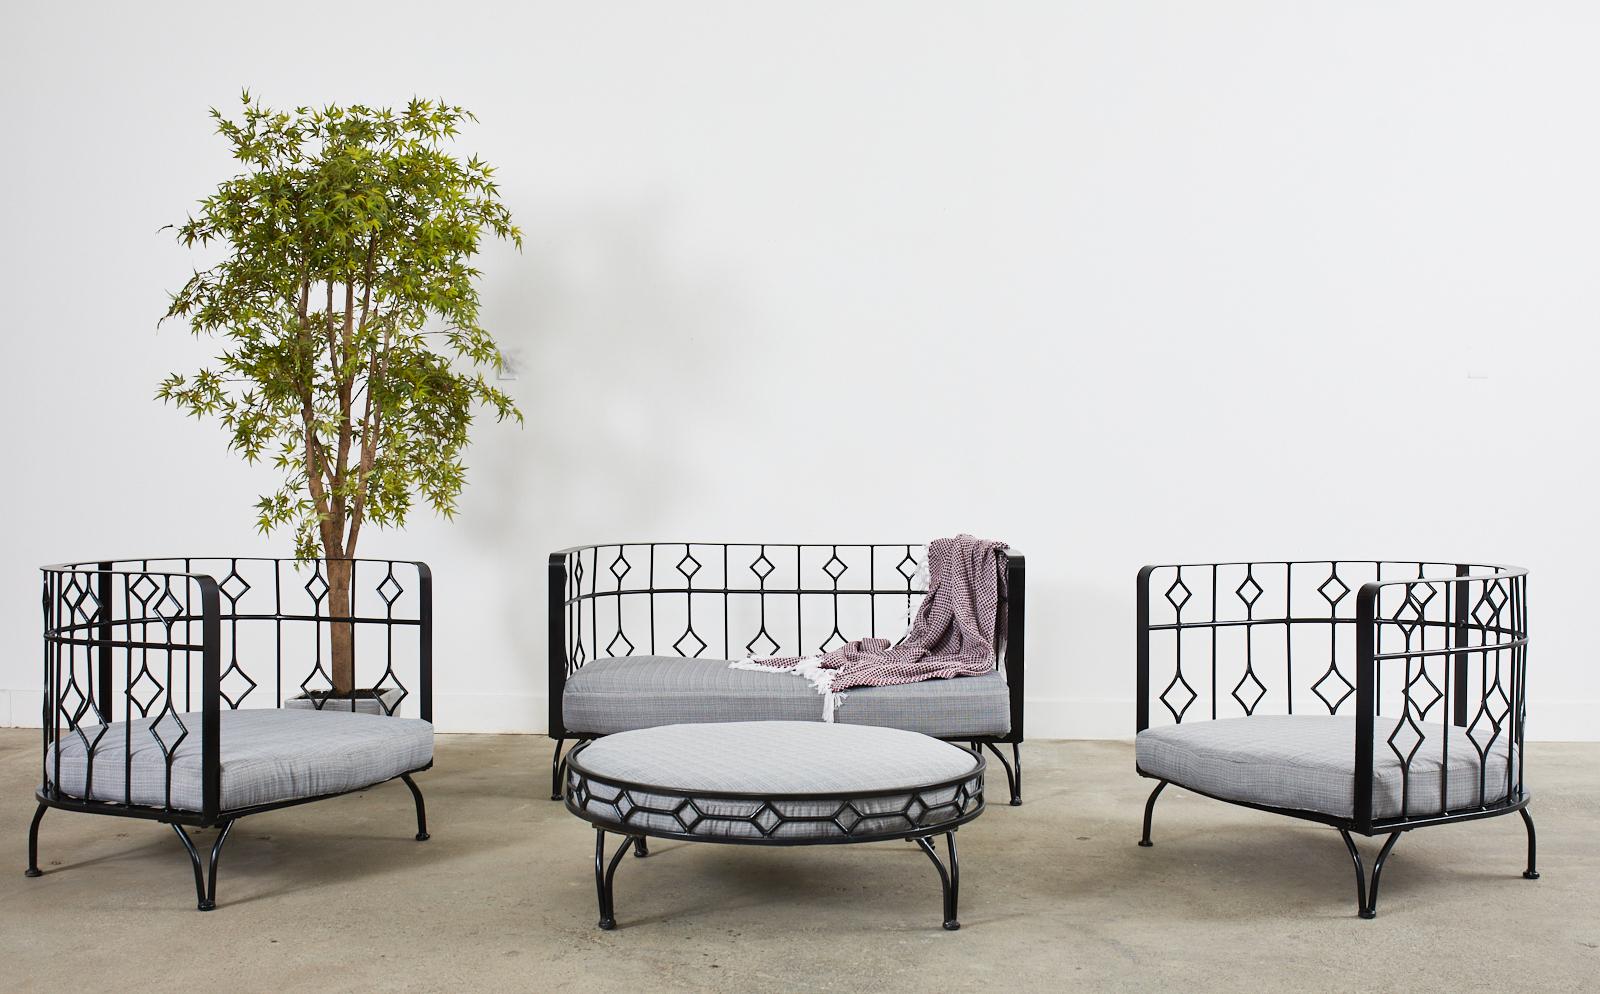 Dramatic post-modern set of four patio and garden furniture suite consisting of two large lounge chairs, one settee, and an ottoman. The set features an iron construction with a black painted finish in a demilune or barrel form frame. The chairs